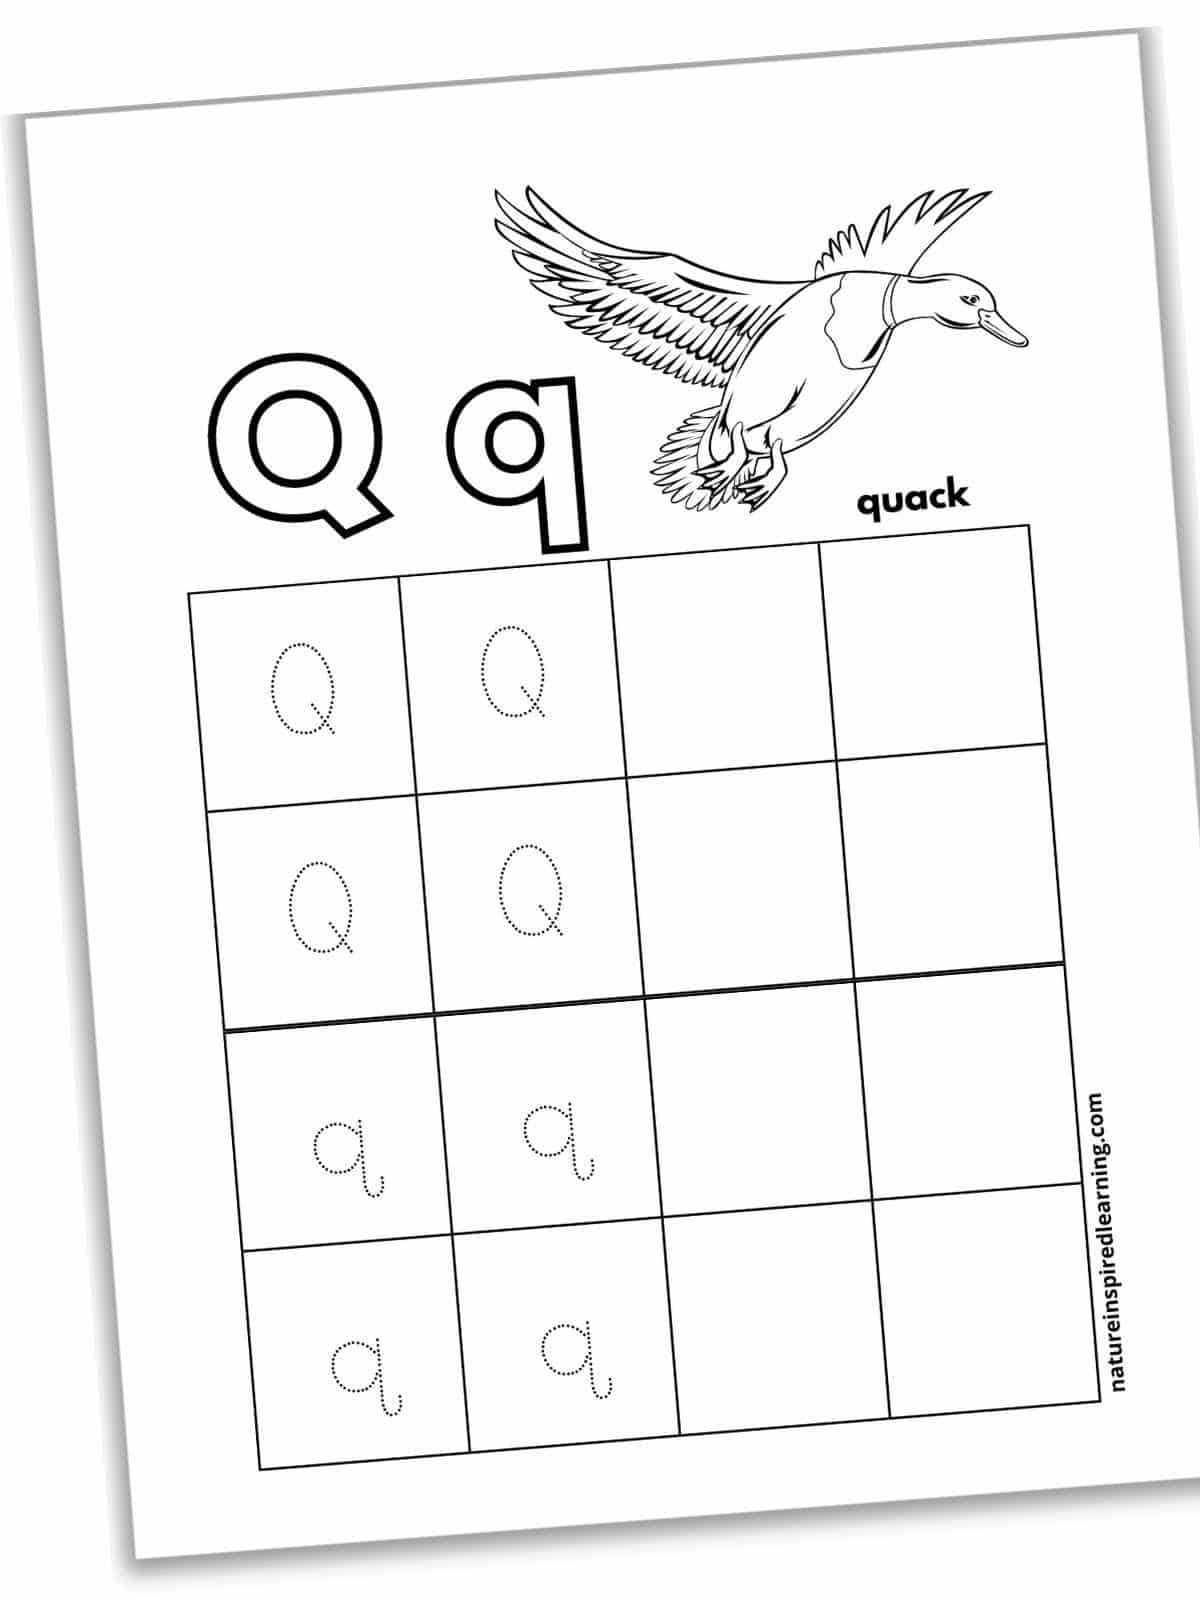 Worksheet with a large grid with traceble letter Q's and a duck at the top